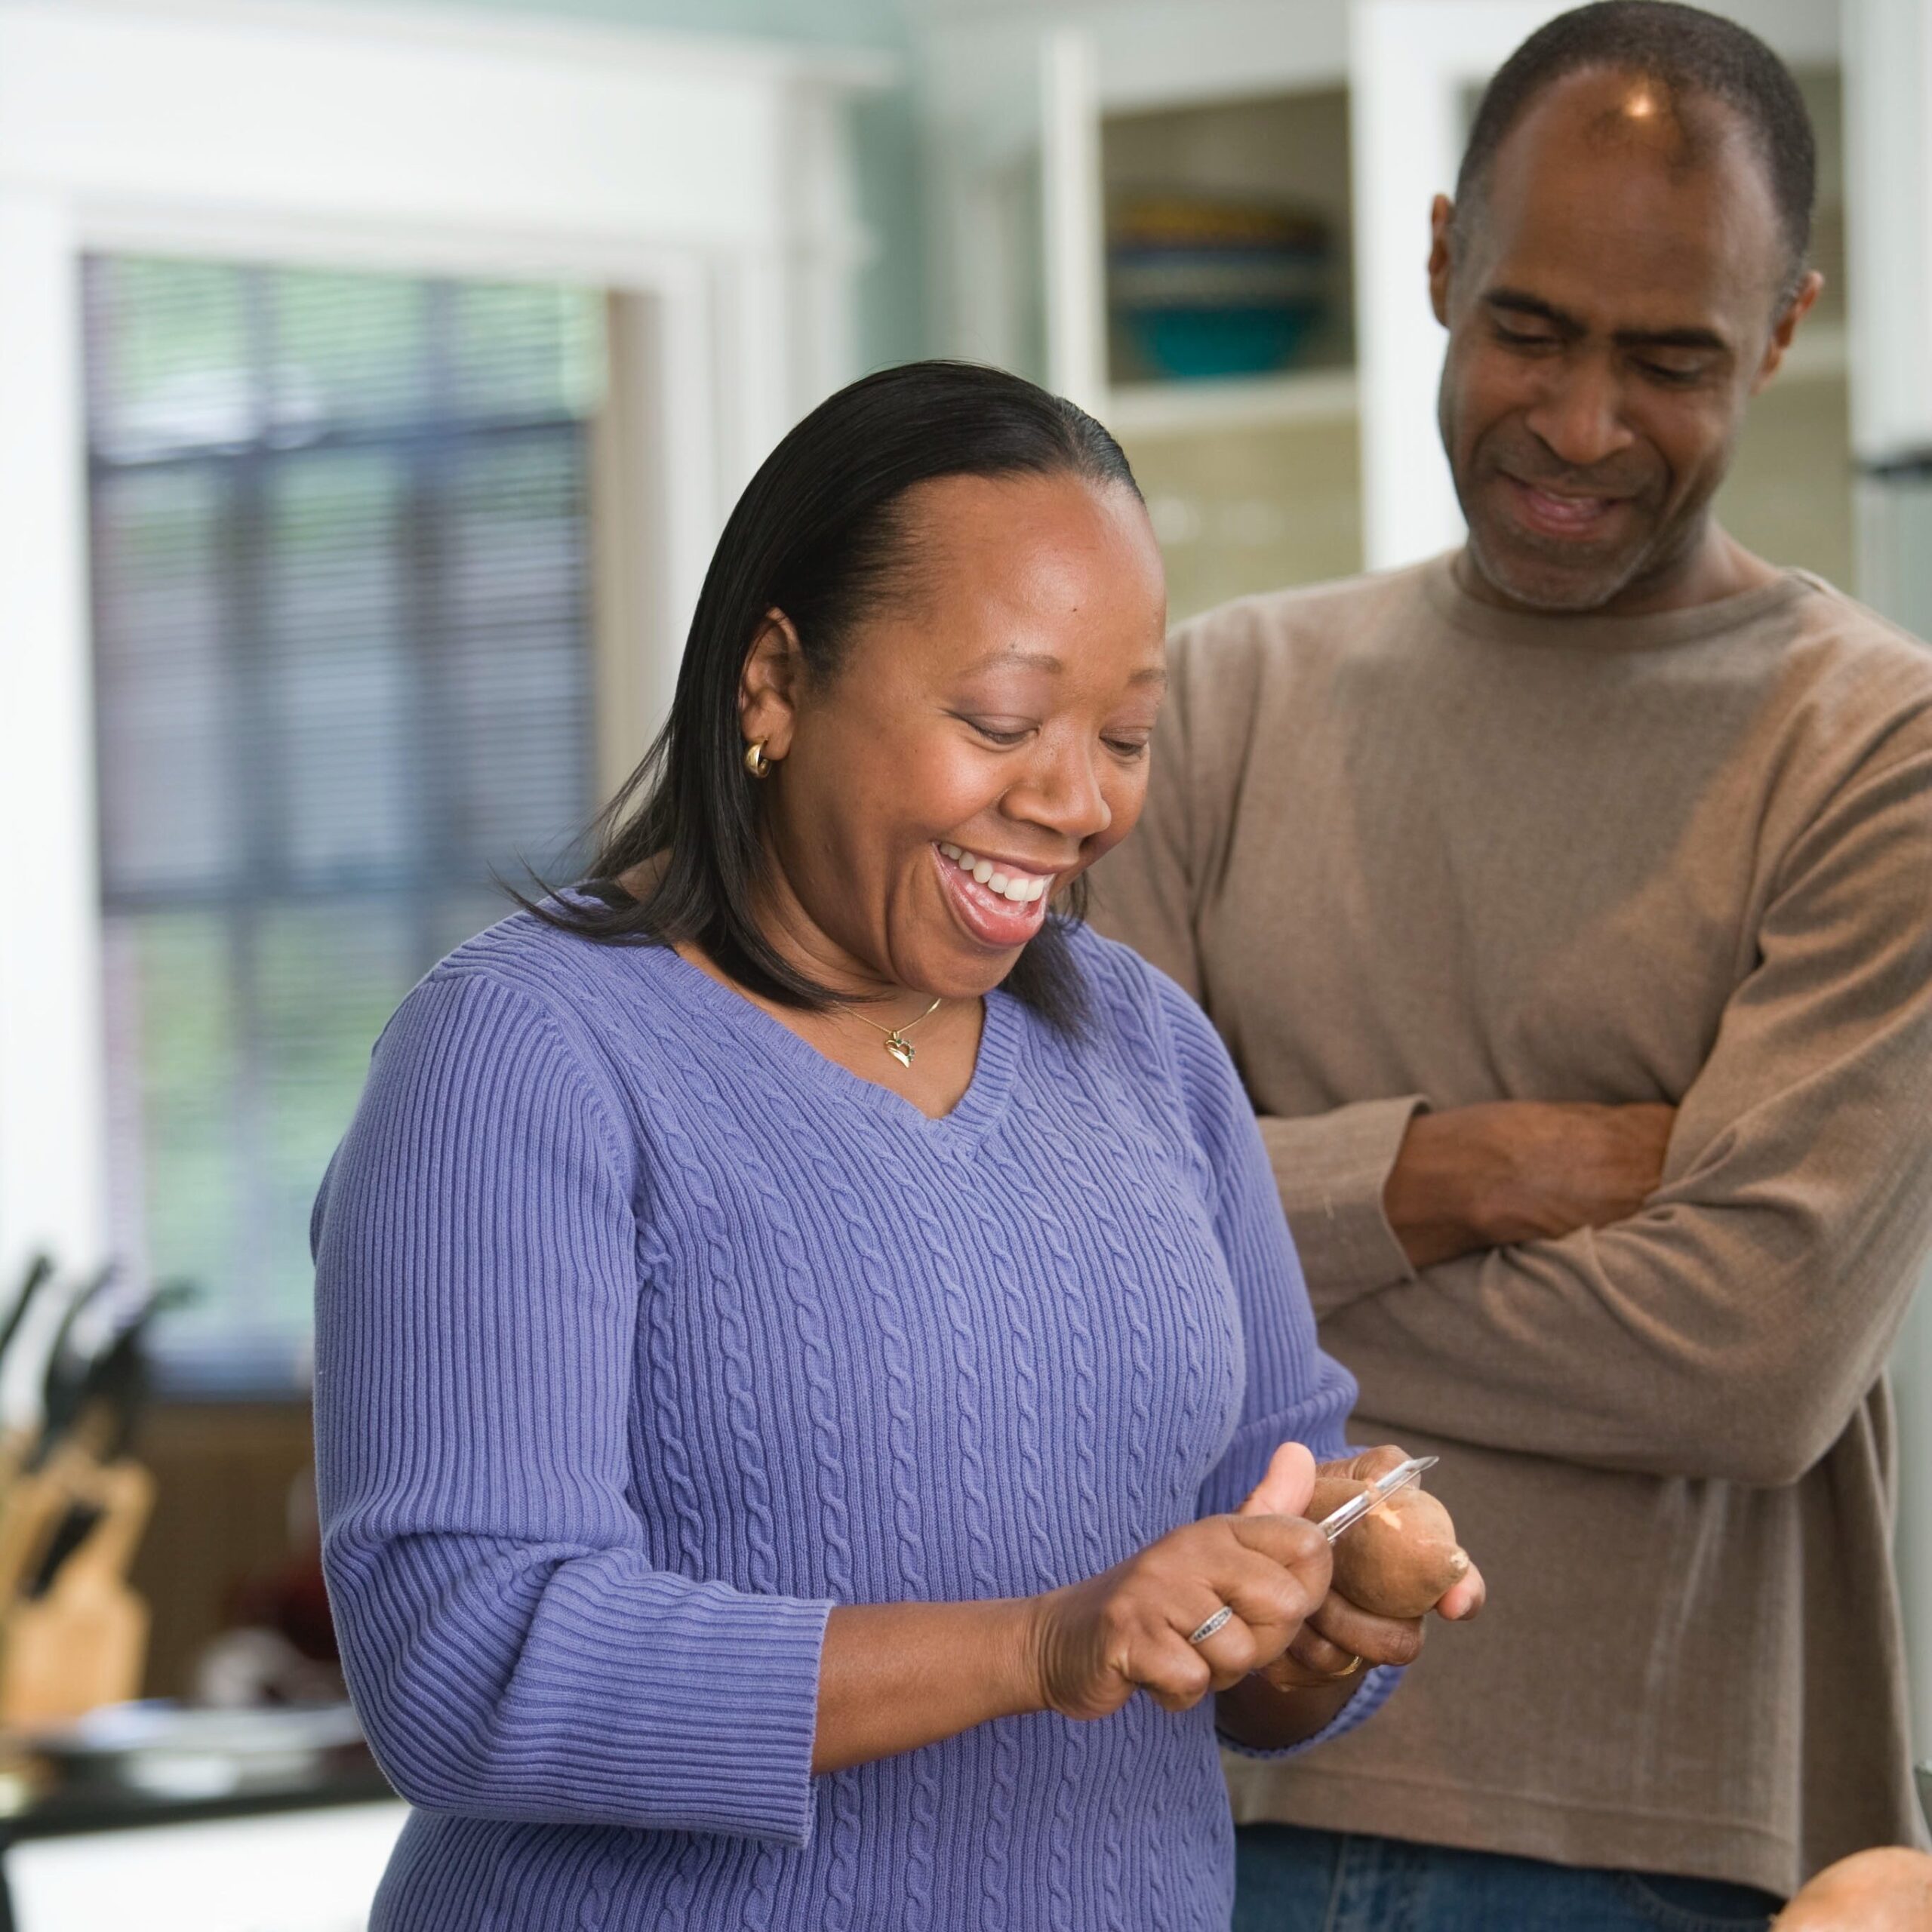 Woman peeling potatoes and laughing and her man standing next to her smiling too. Older couple dating. 
Photo by CDC on Unsplash